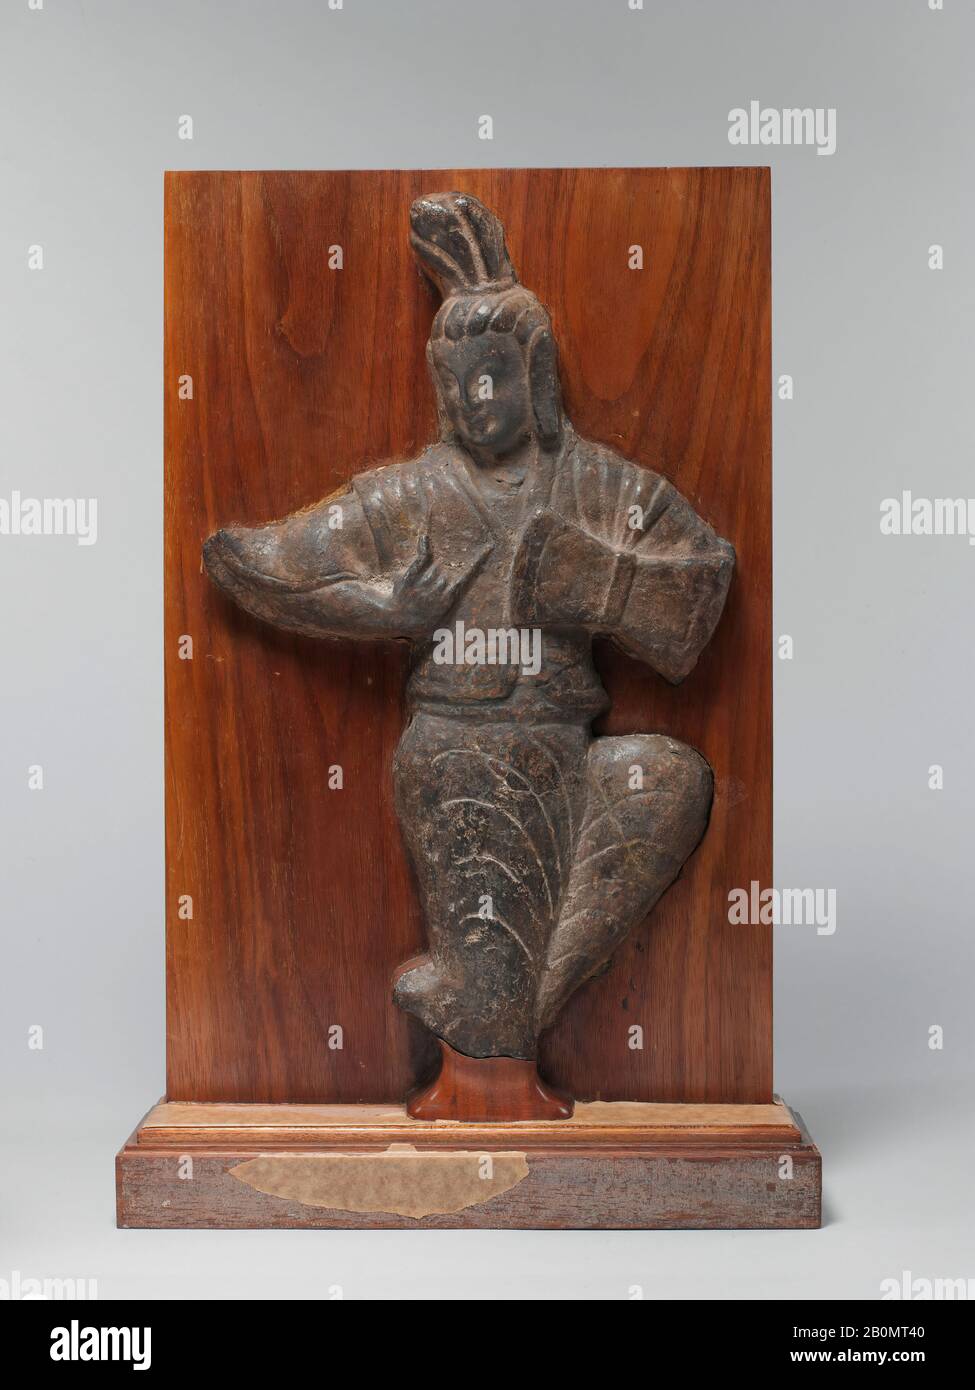 Musician Playing a Drum, China, Northern Wei dynasty (386–534), Date early 6th century, China, Limestone, H. 14 1/4 in. (36.2 cm); W. 9 in. (22.9 cm); D. 2 in. (5.1 cm), Sculpture Stock Photo